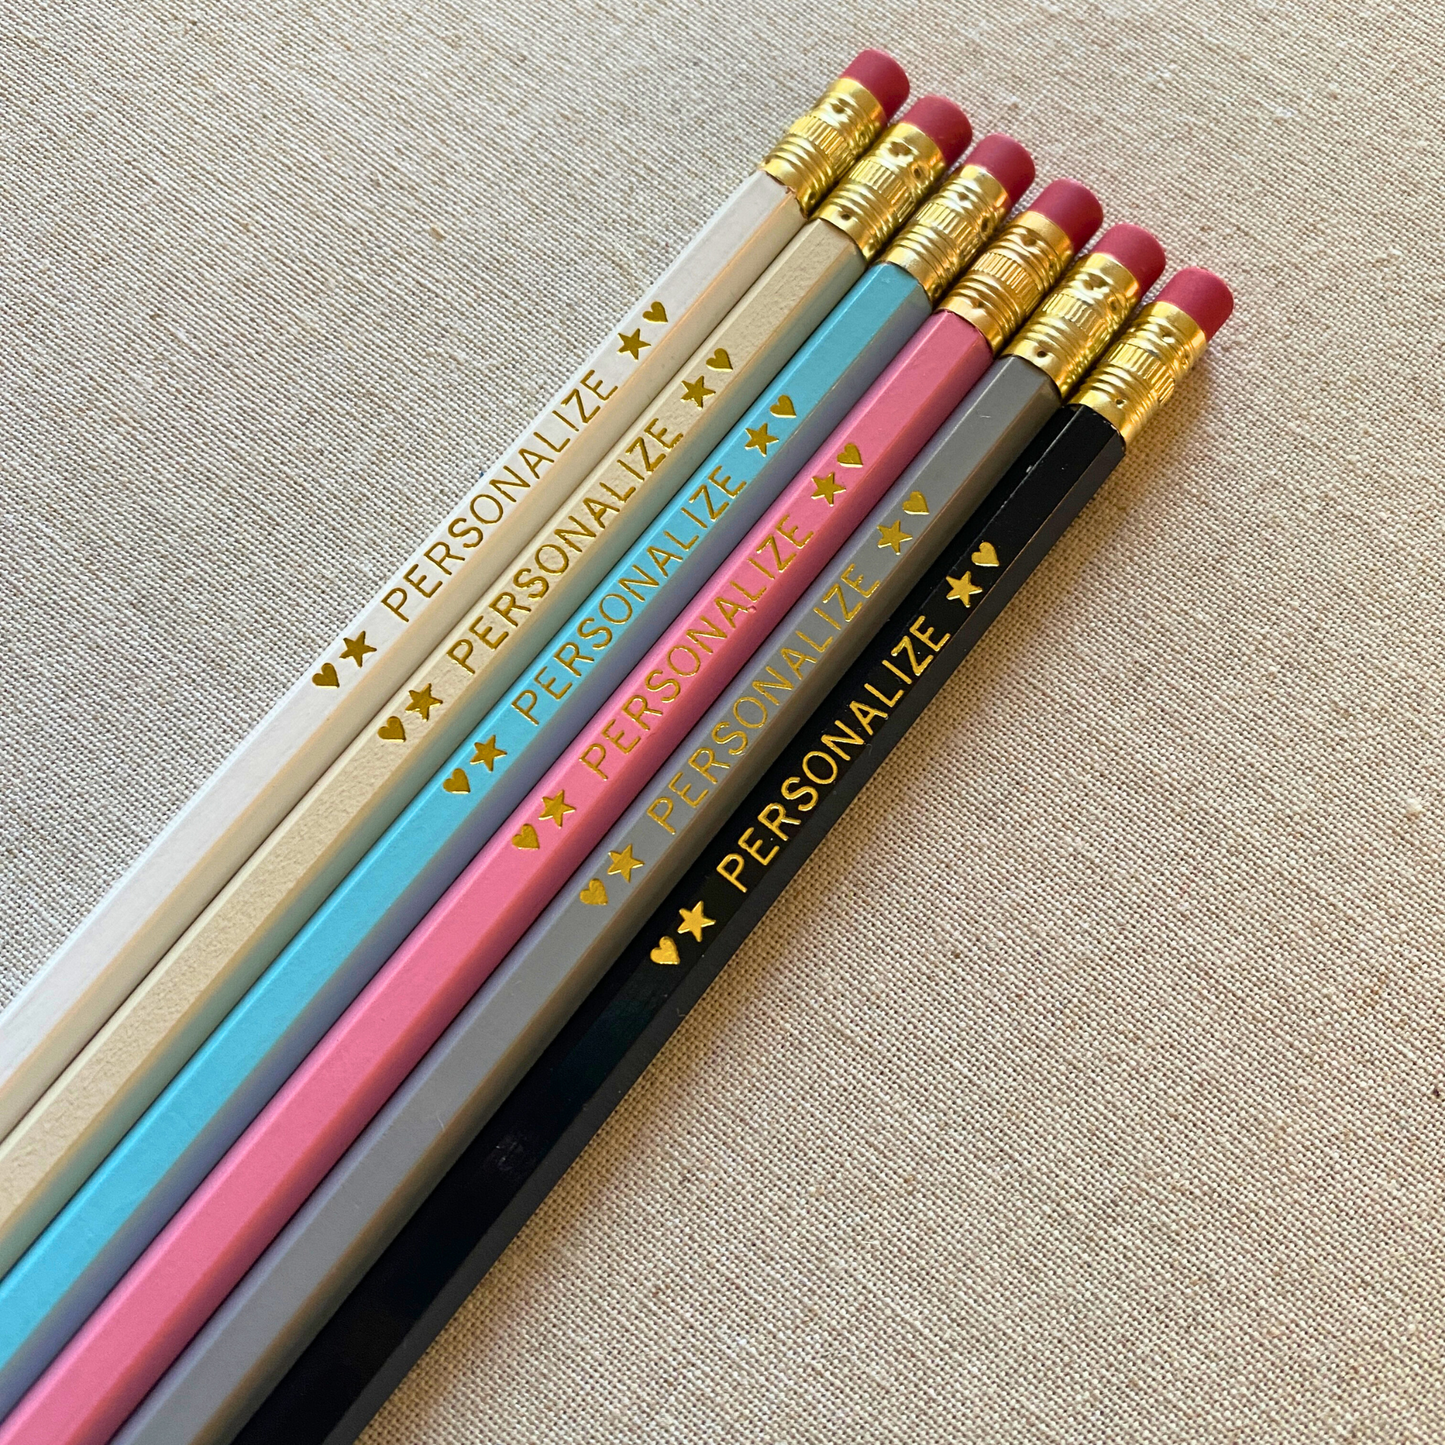 6 Personalized Pencil Set SERENITY